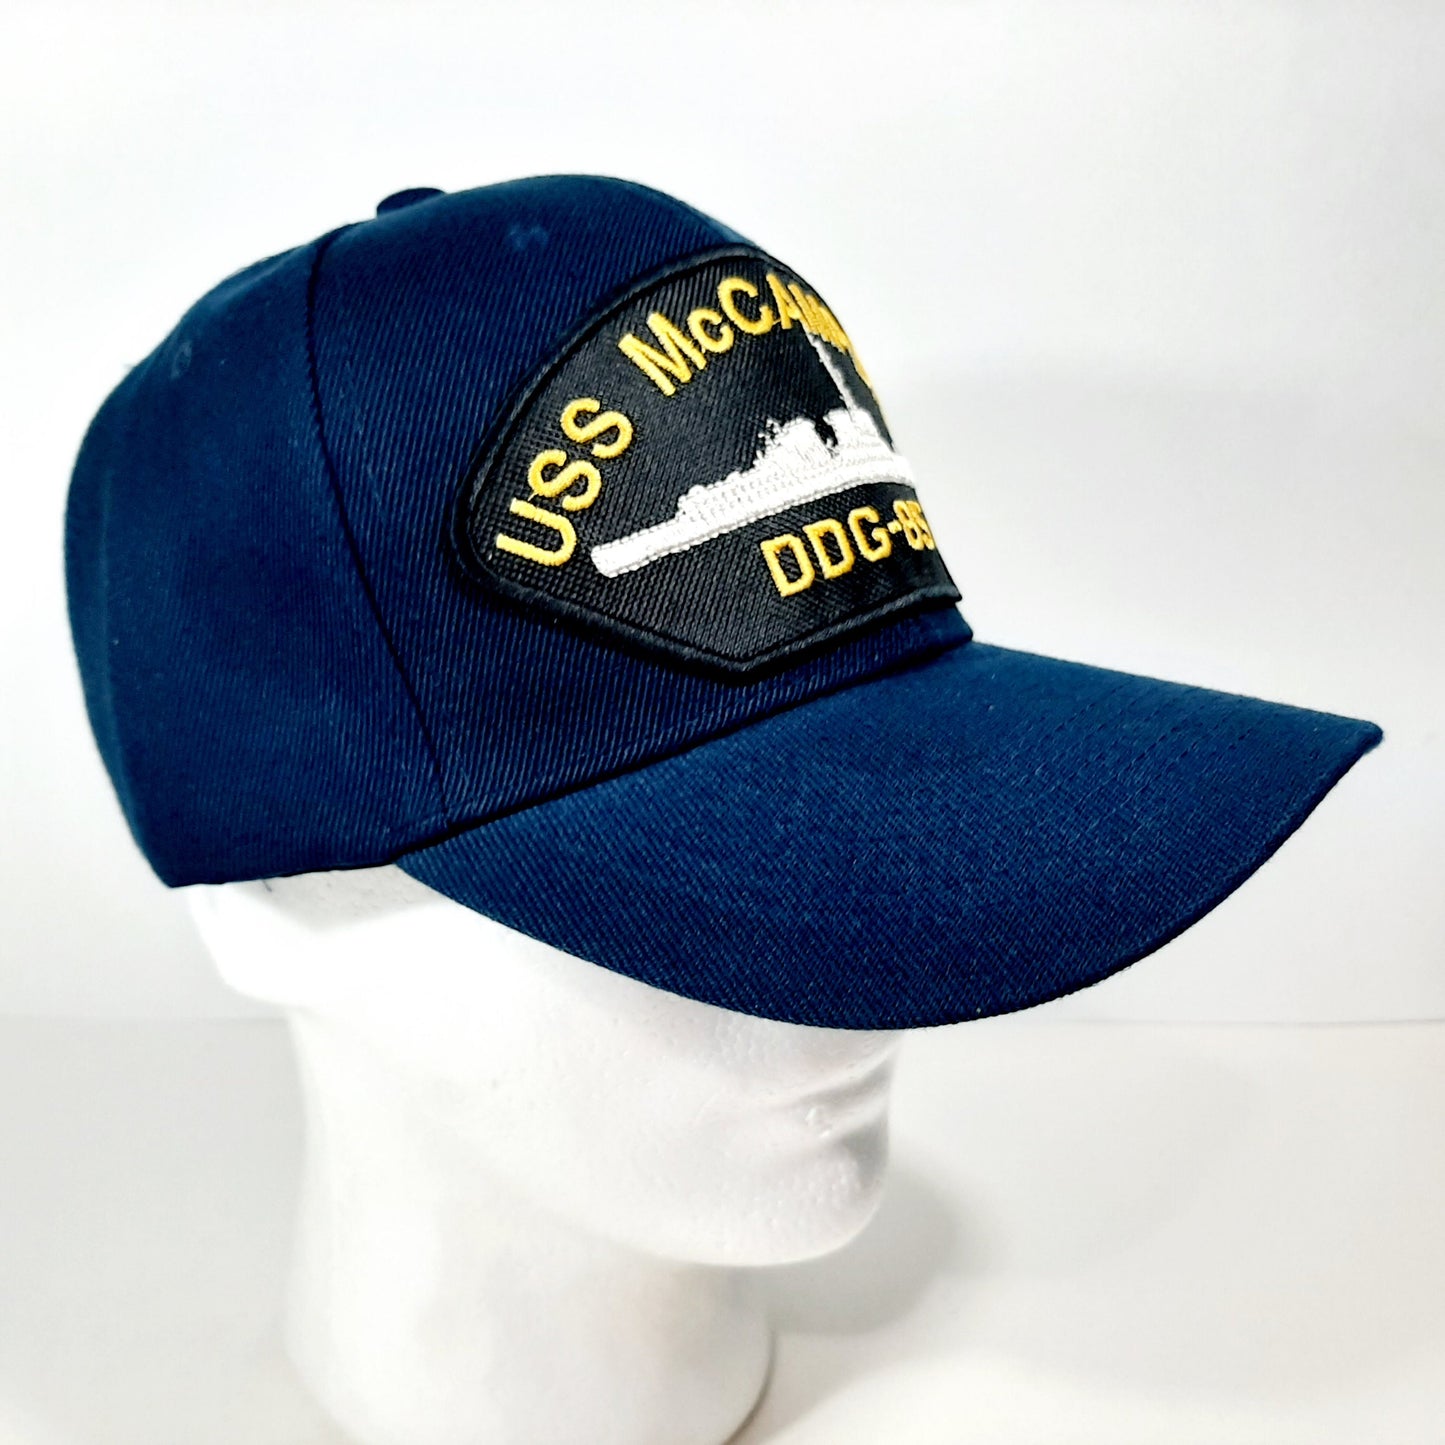 USS McCAMPBELL DDG-85 US Navy Embroidered Patch Hat Baseball Cap Blue